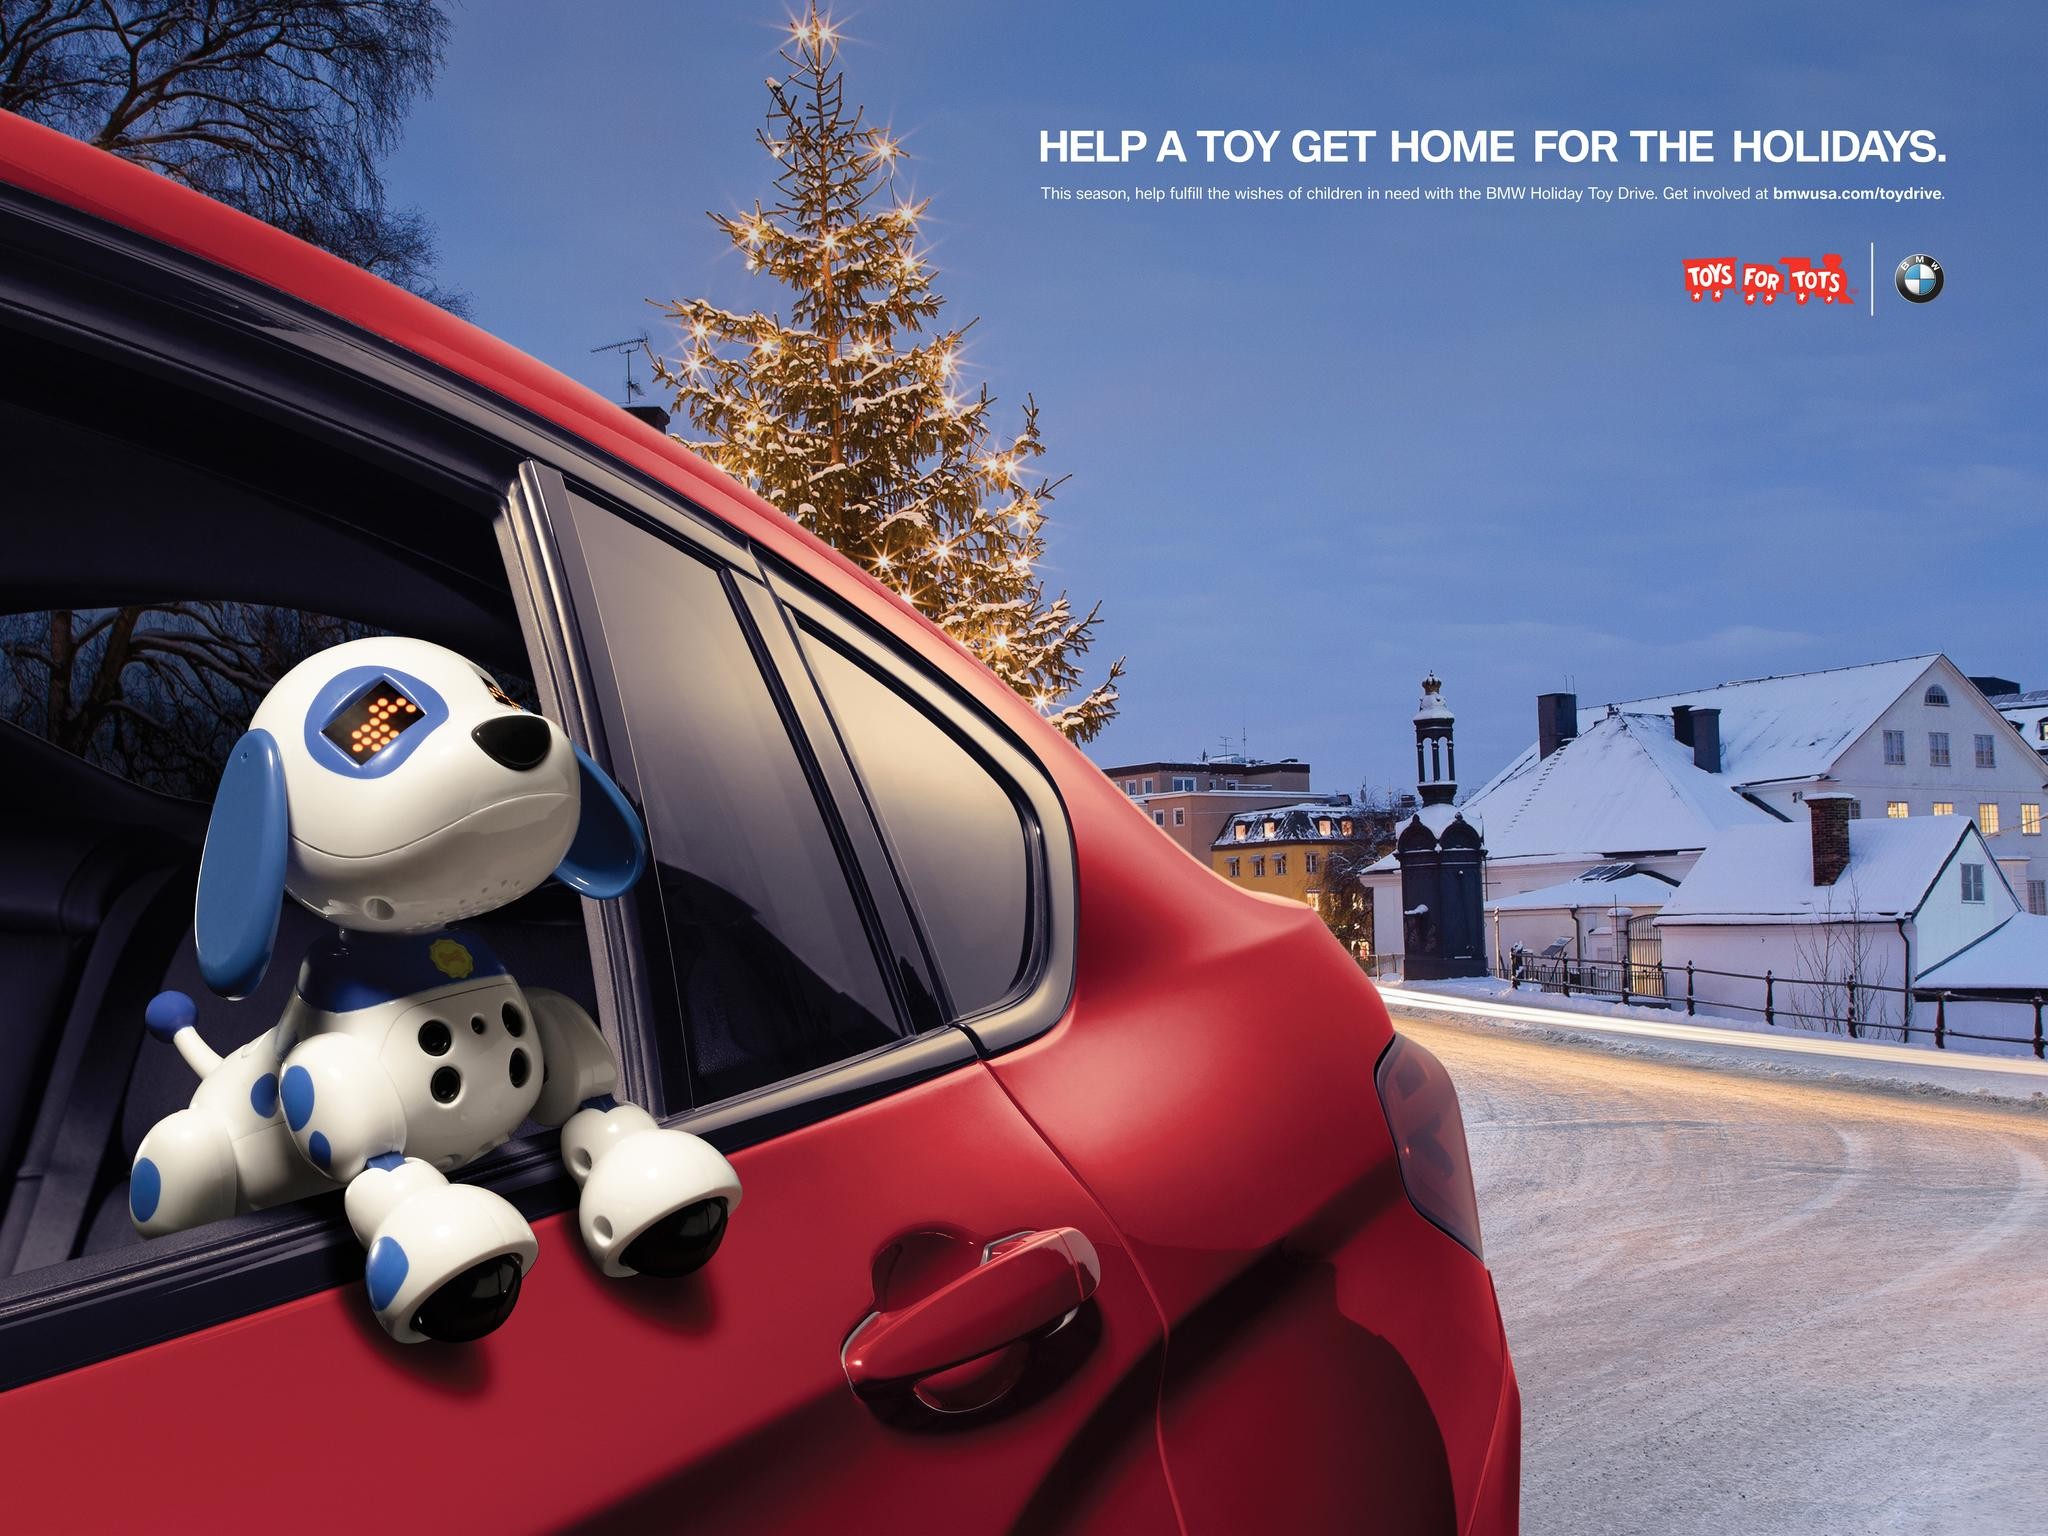 BMW Holiday Toy Drive